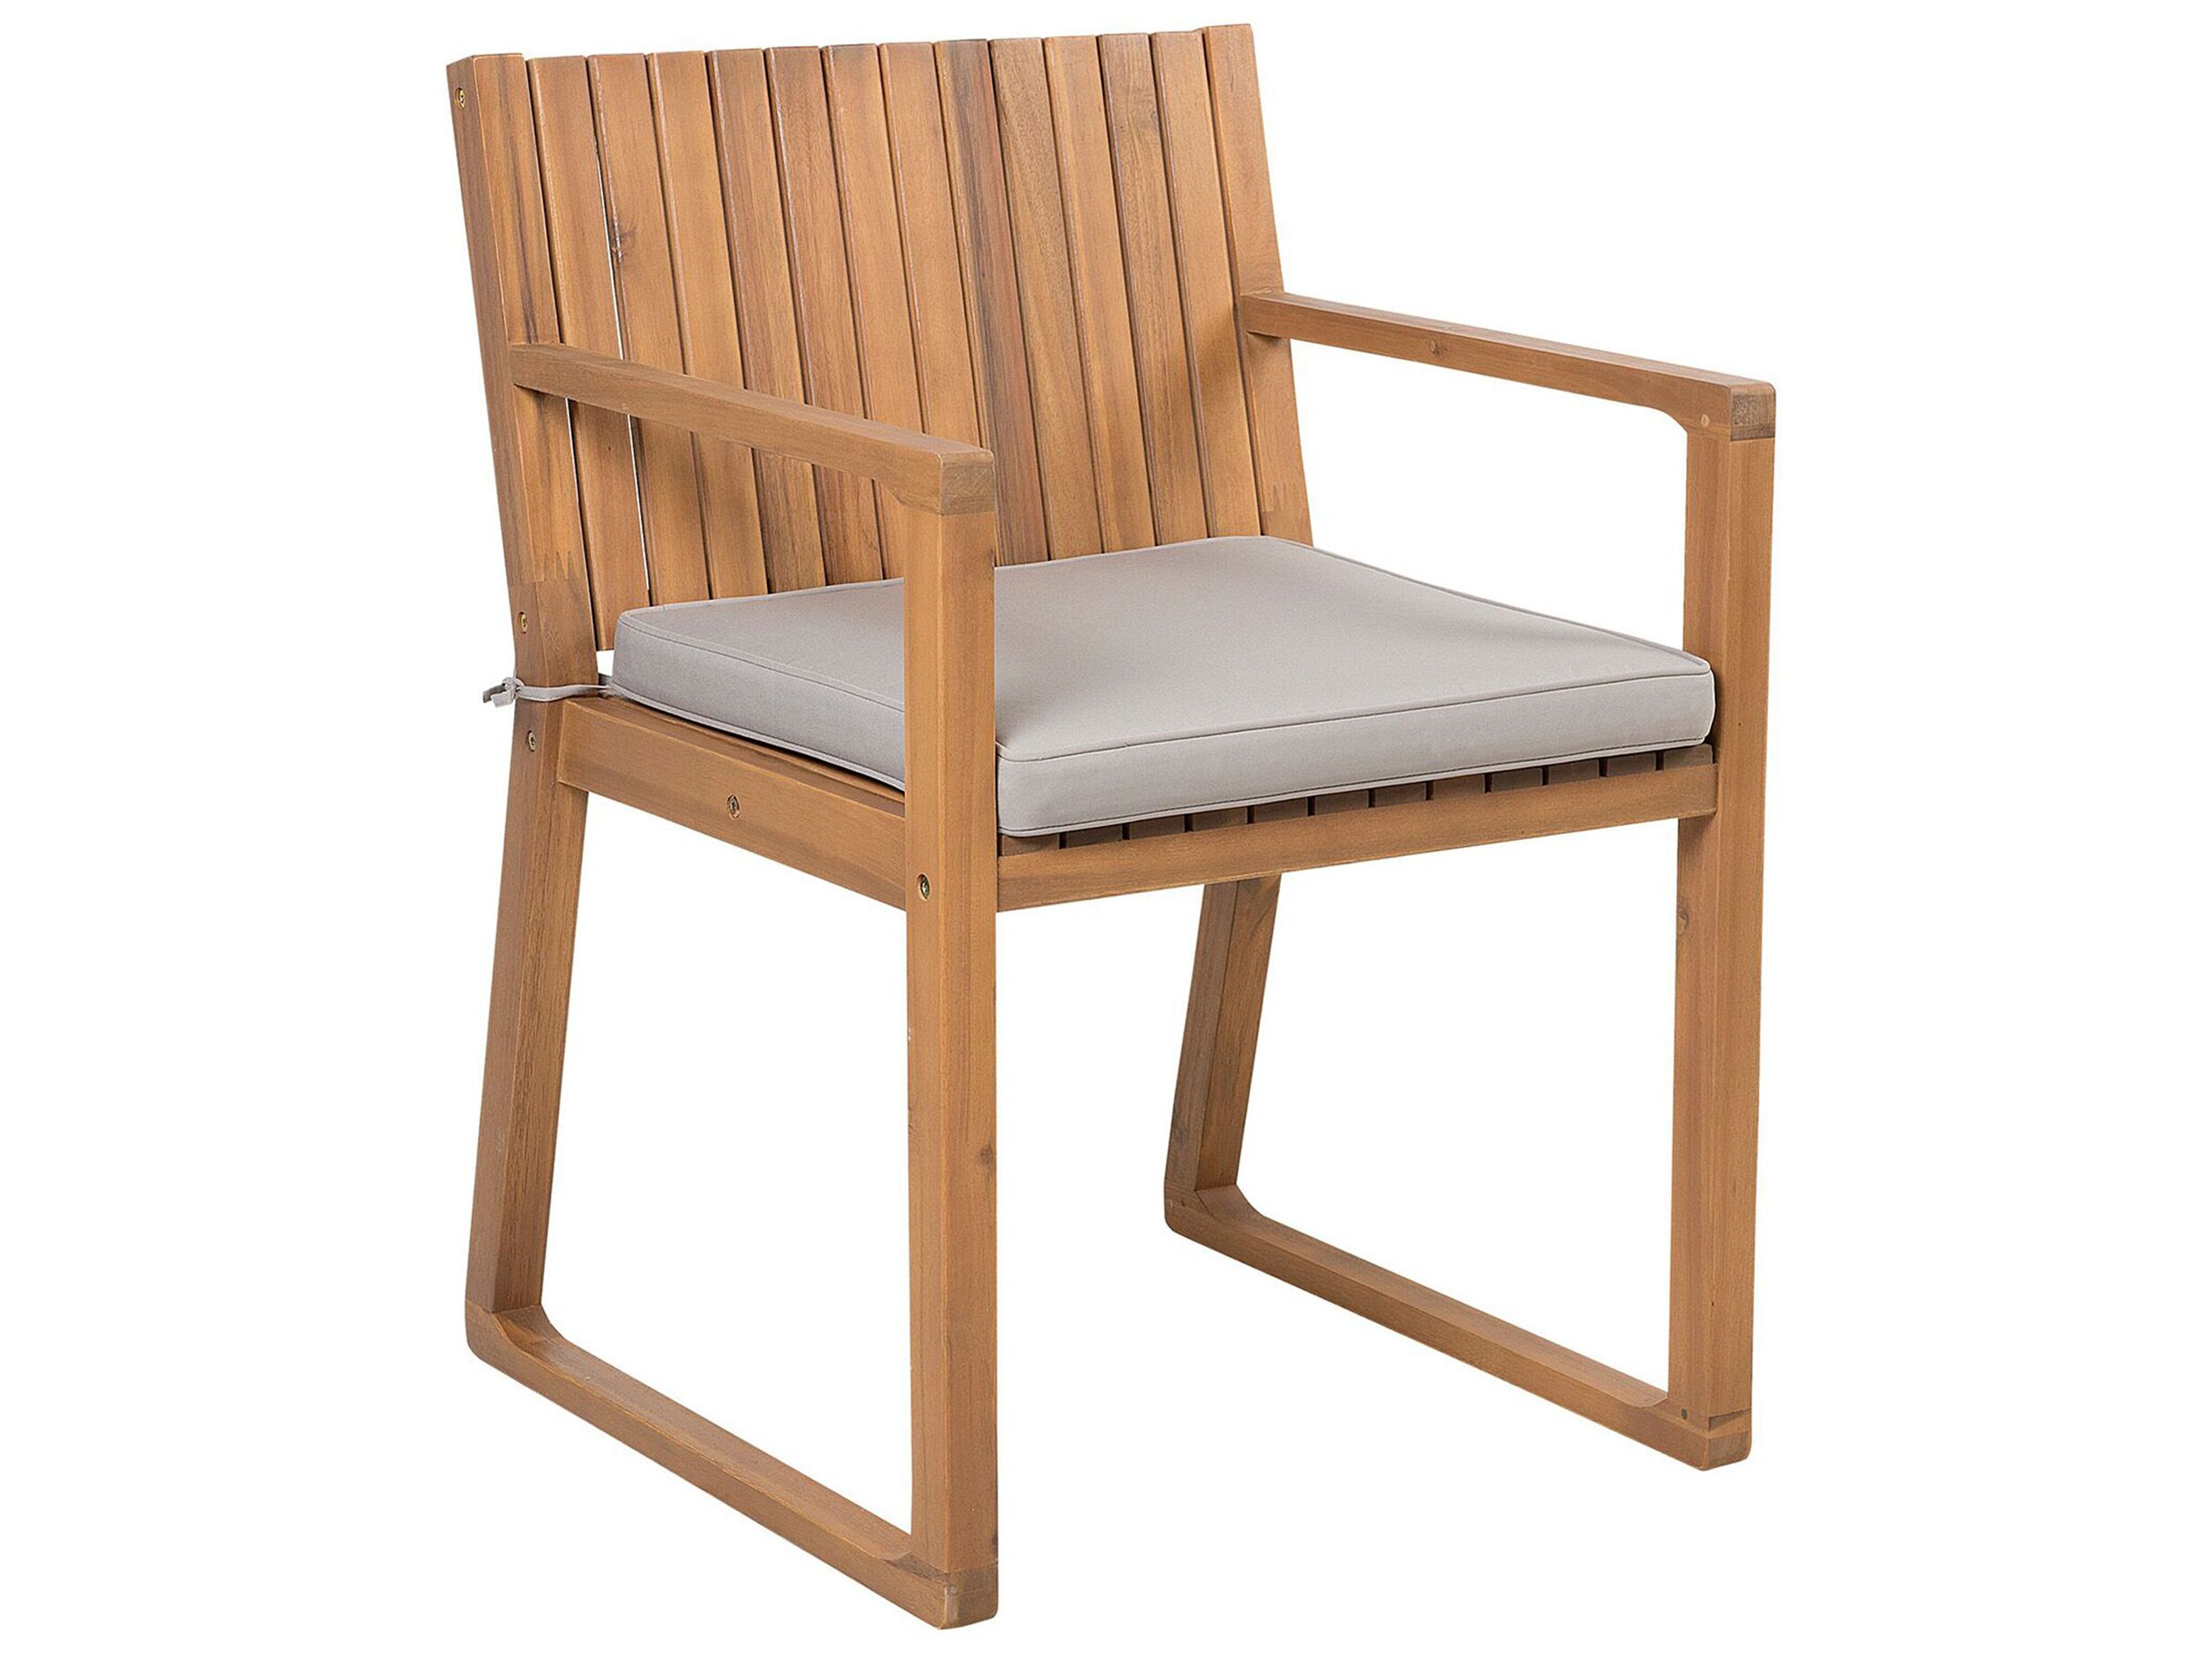 Acacia Wood Garden Dining Chair With, Wooden Outdoor Dining Chairs With Cushions